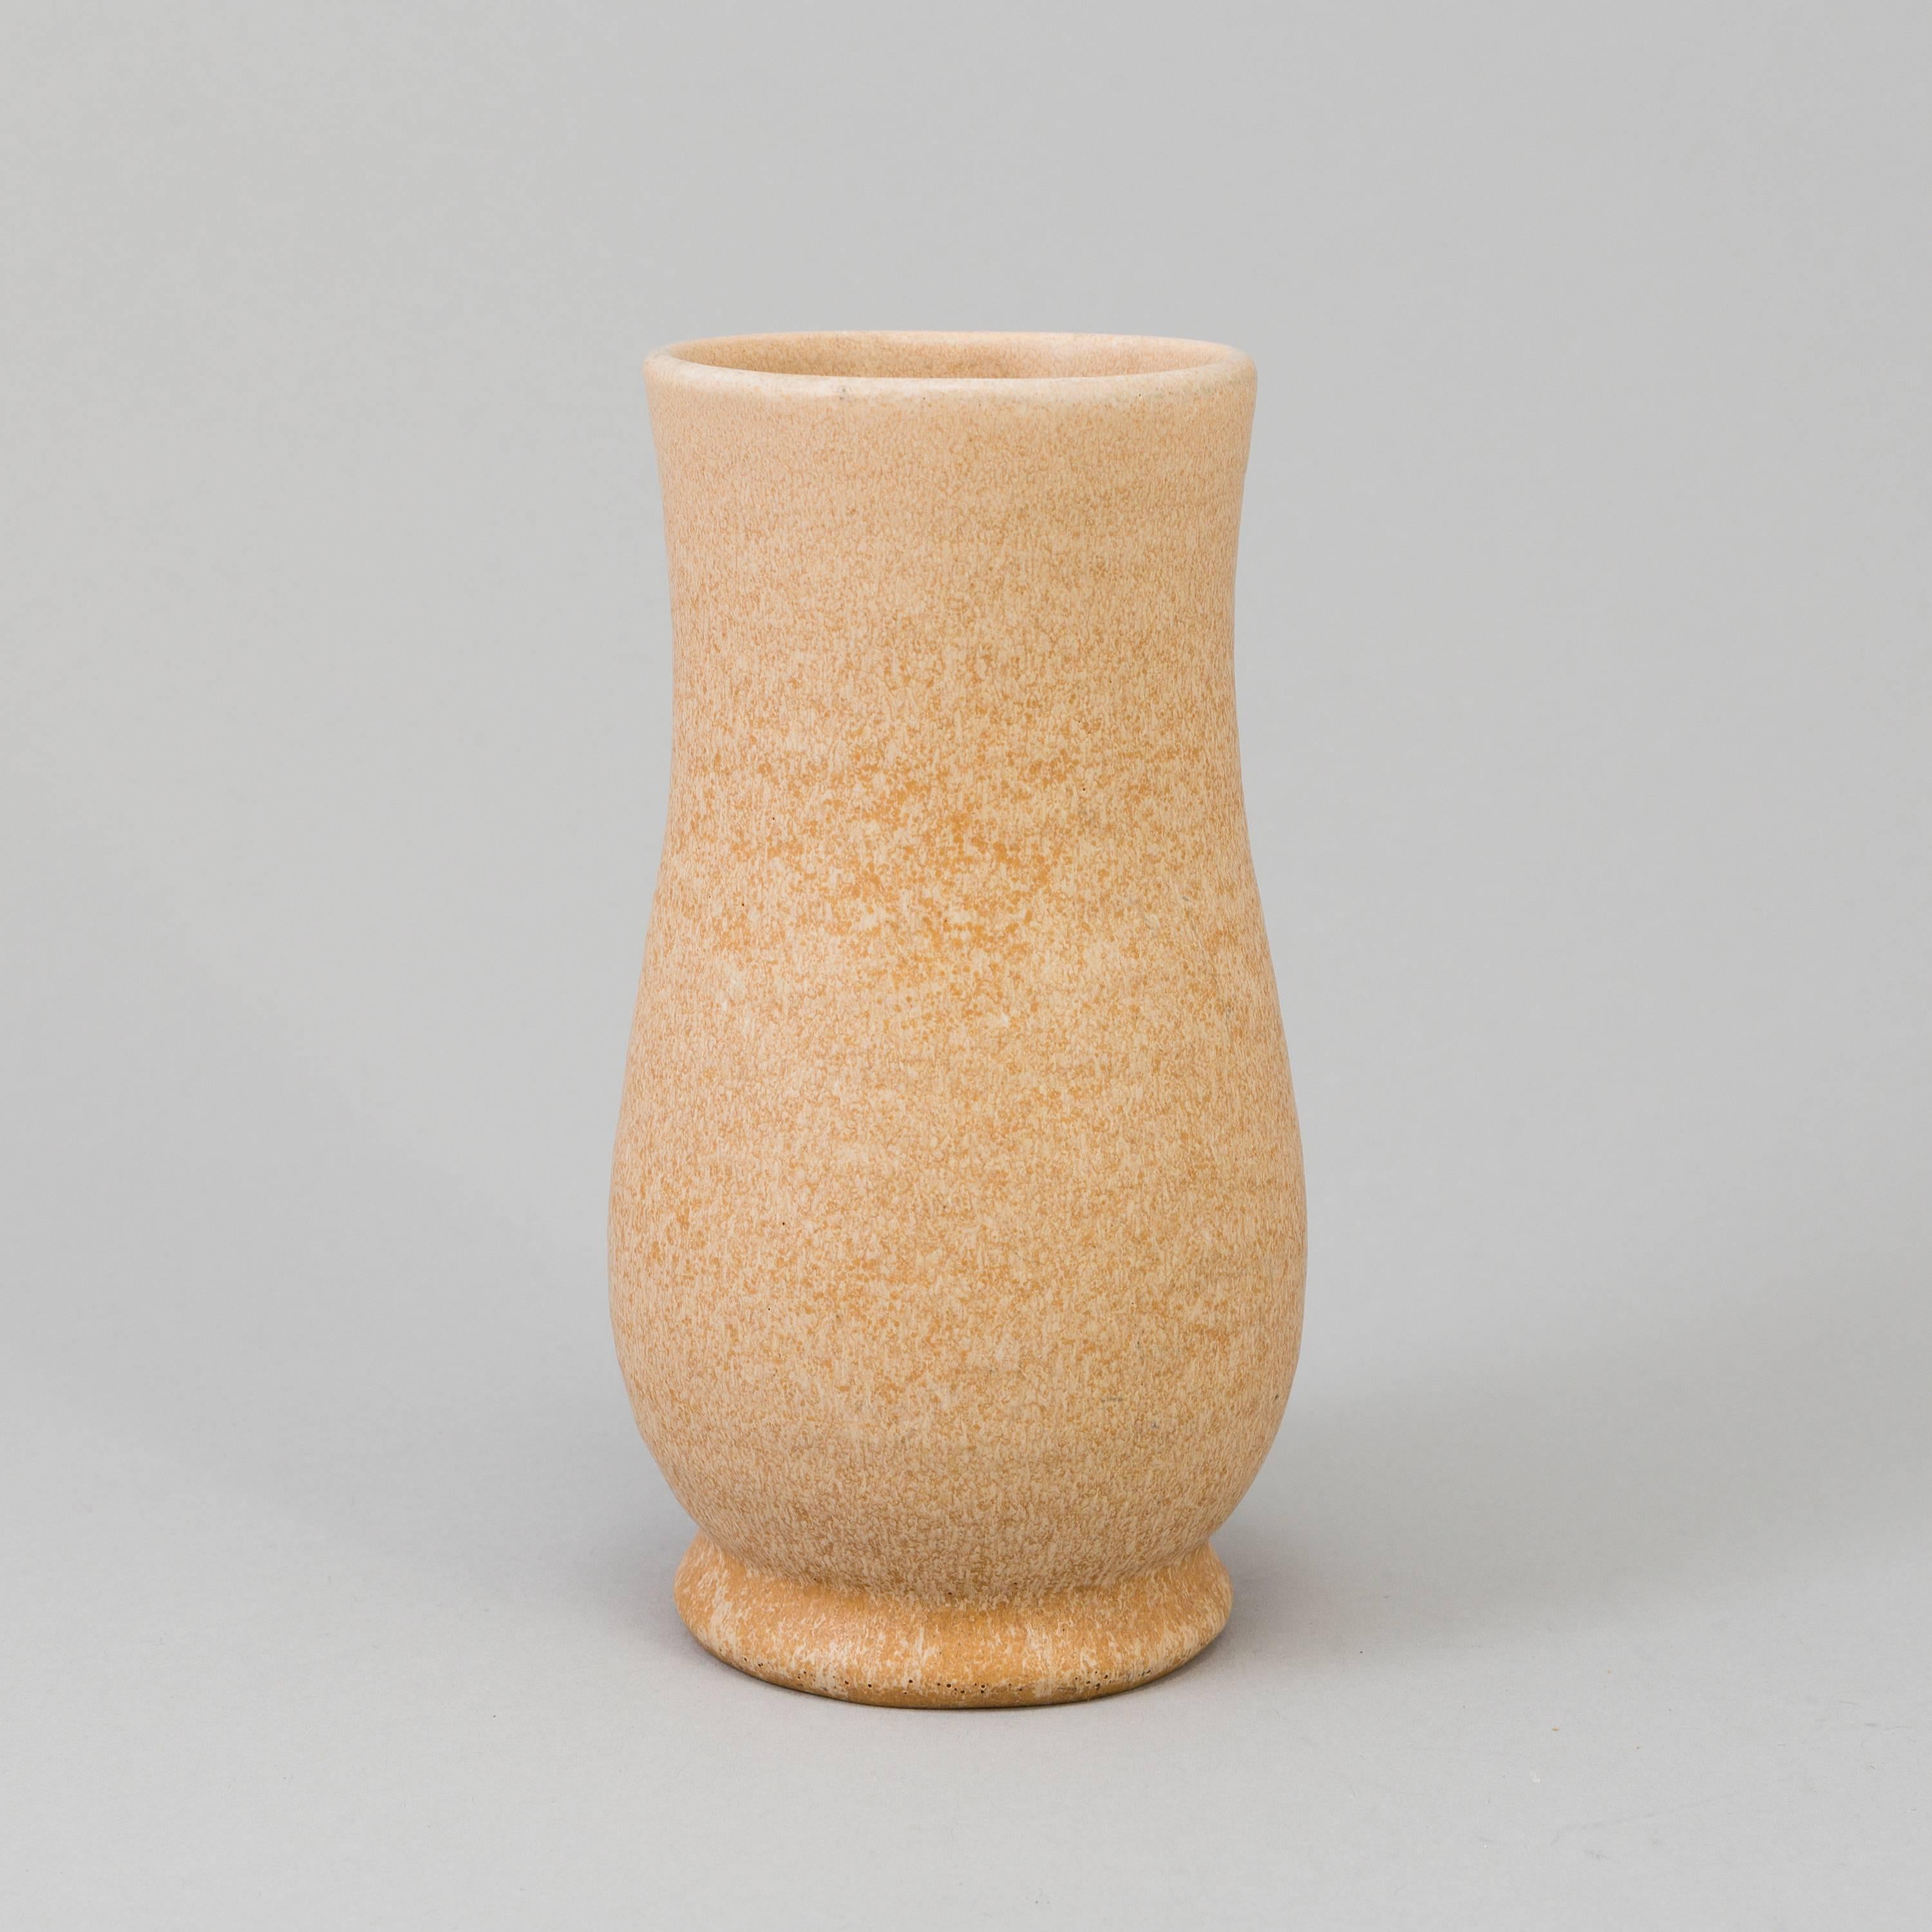 A vase by Edward Dahlskog for Bo Fajans.
Measure: Height 16 cm.

Dahlskog is represented at the National Museum in Stockholm.